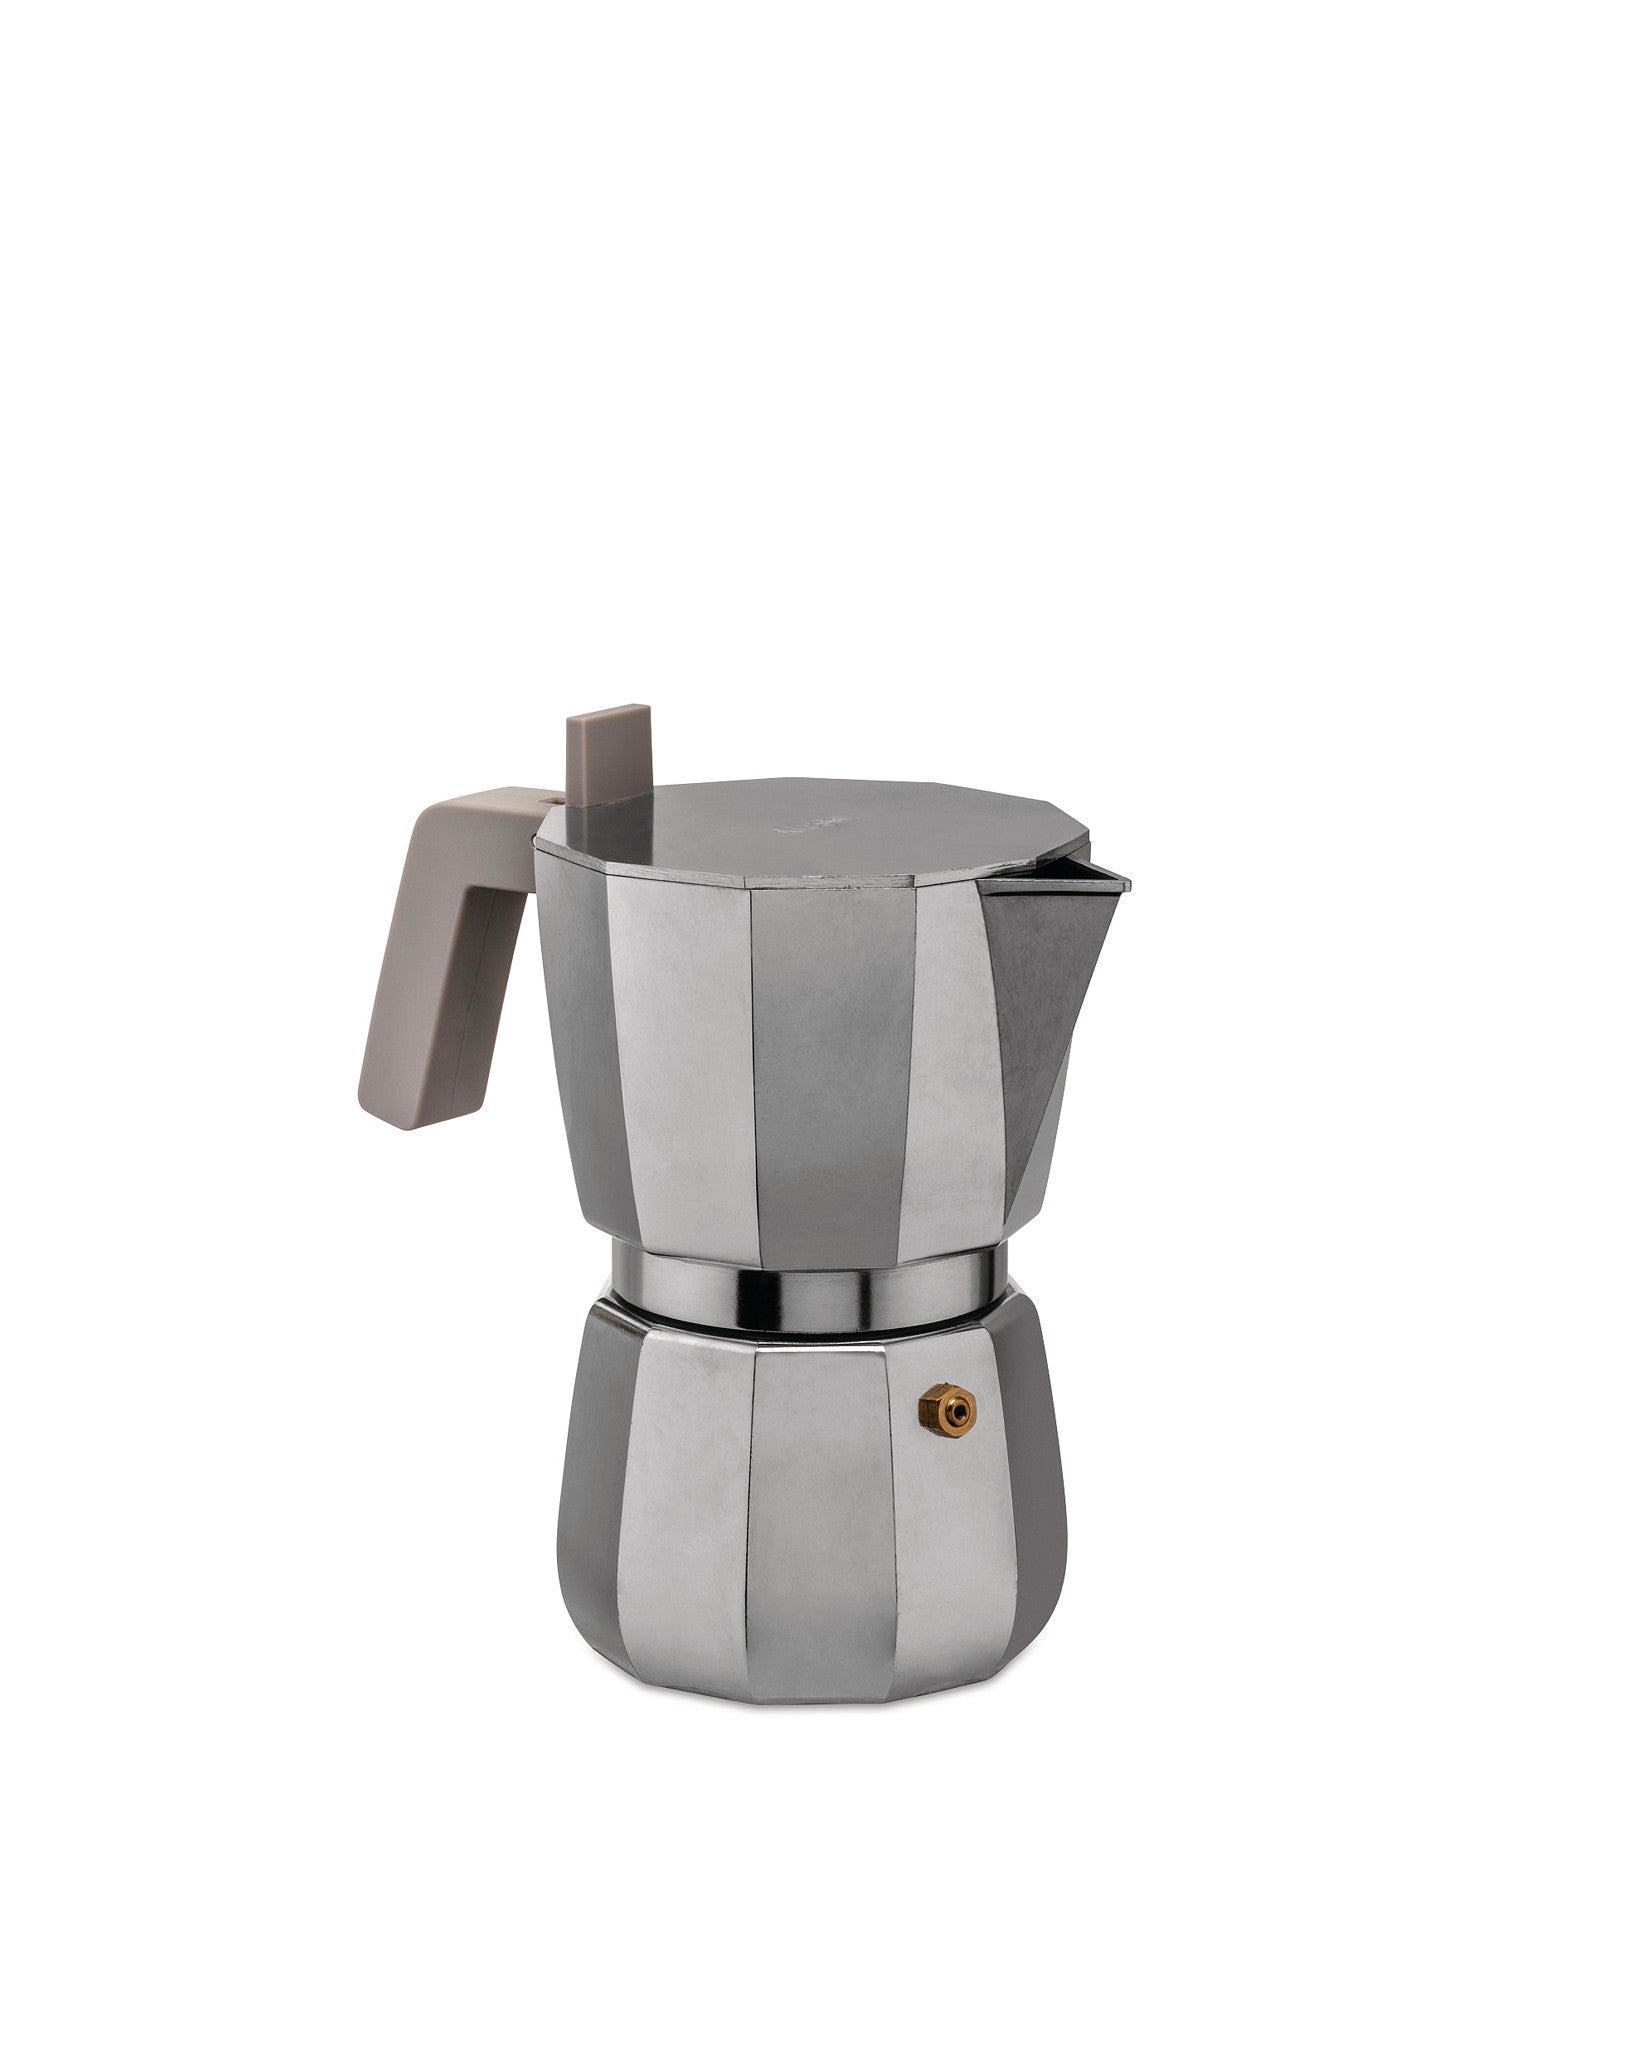 Bialetti Induction 6 Cup Stovetop Espresso Maker - Cupper's Coffee & Tea